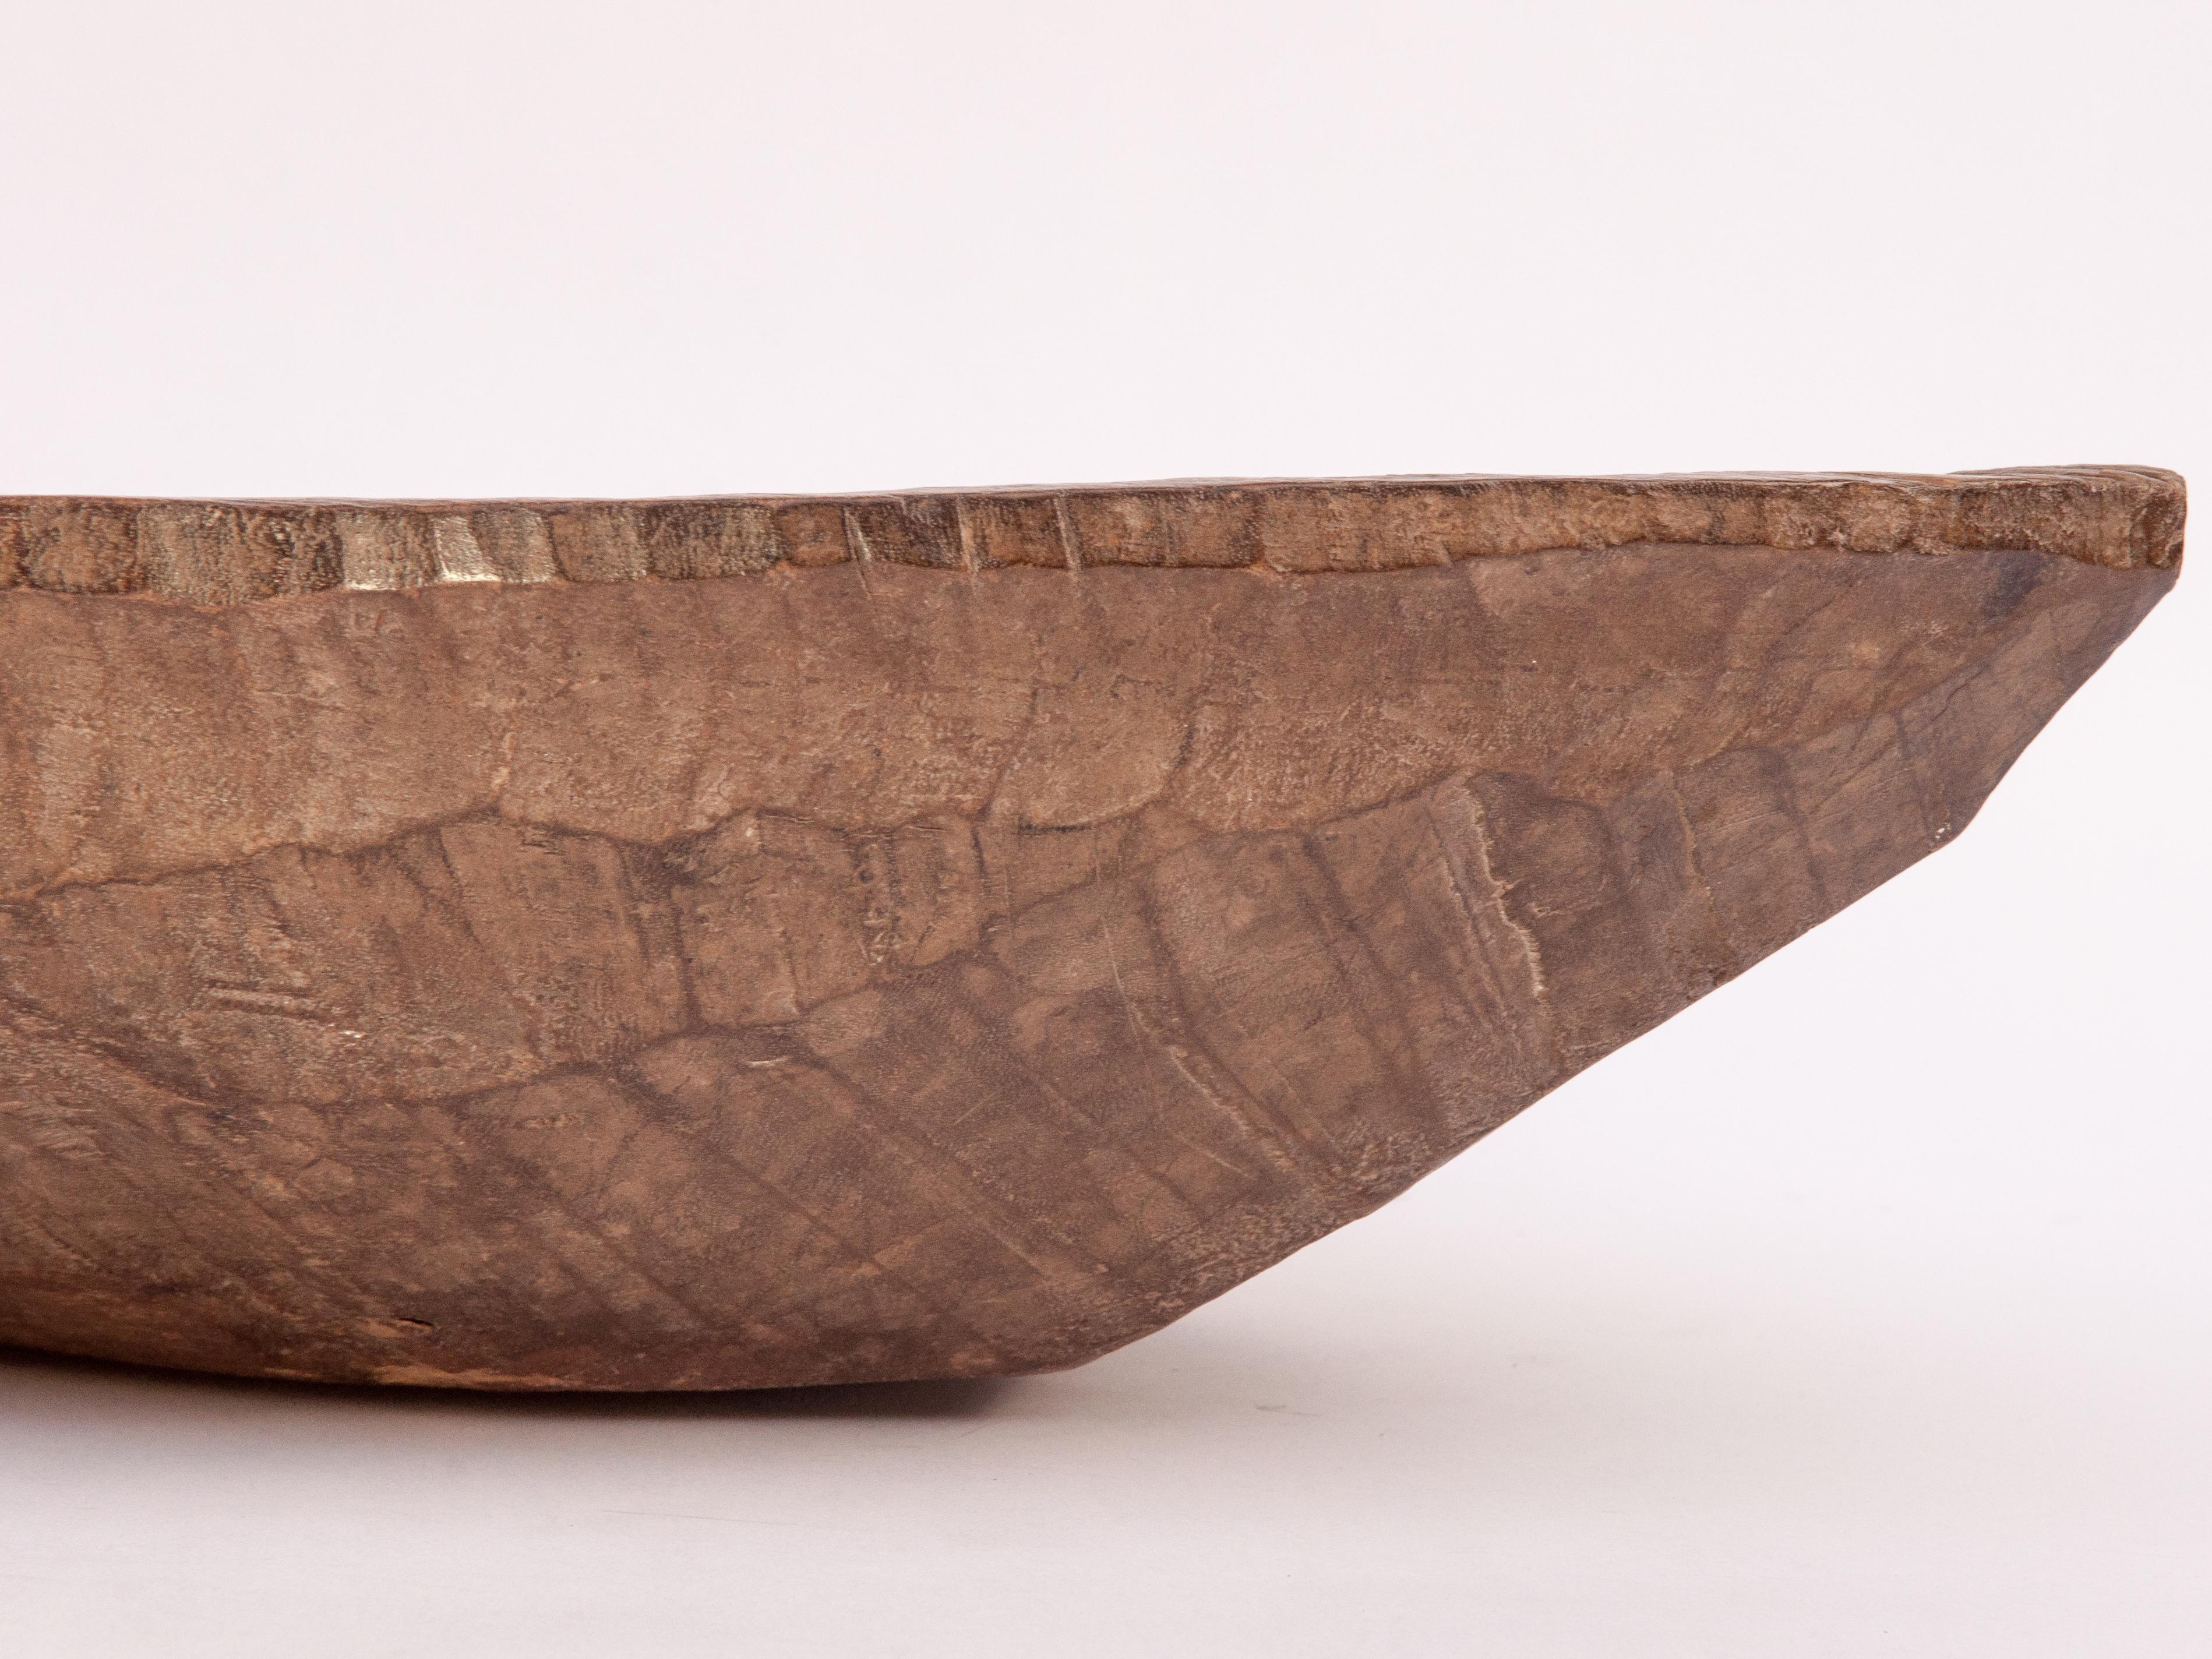 Tribal Hand Hewn Wooden Tray, Bowl, Mentawai Islands, Early to Mid-20th Century 12